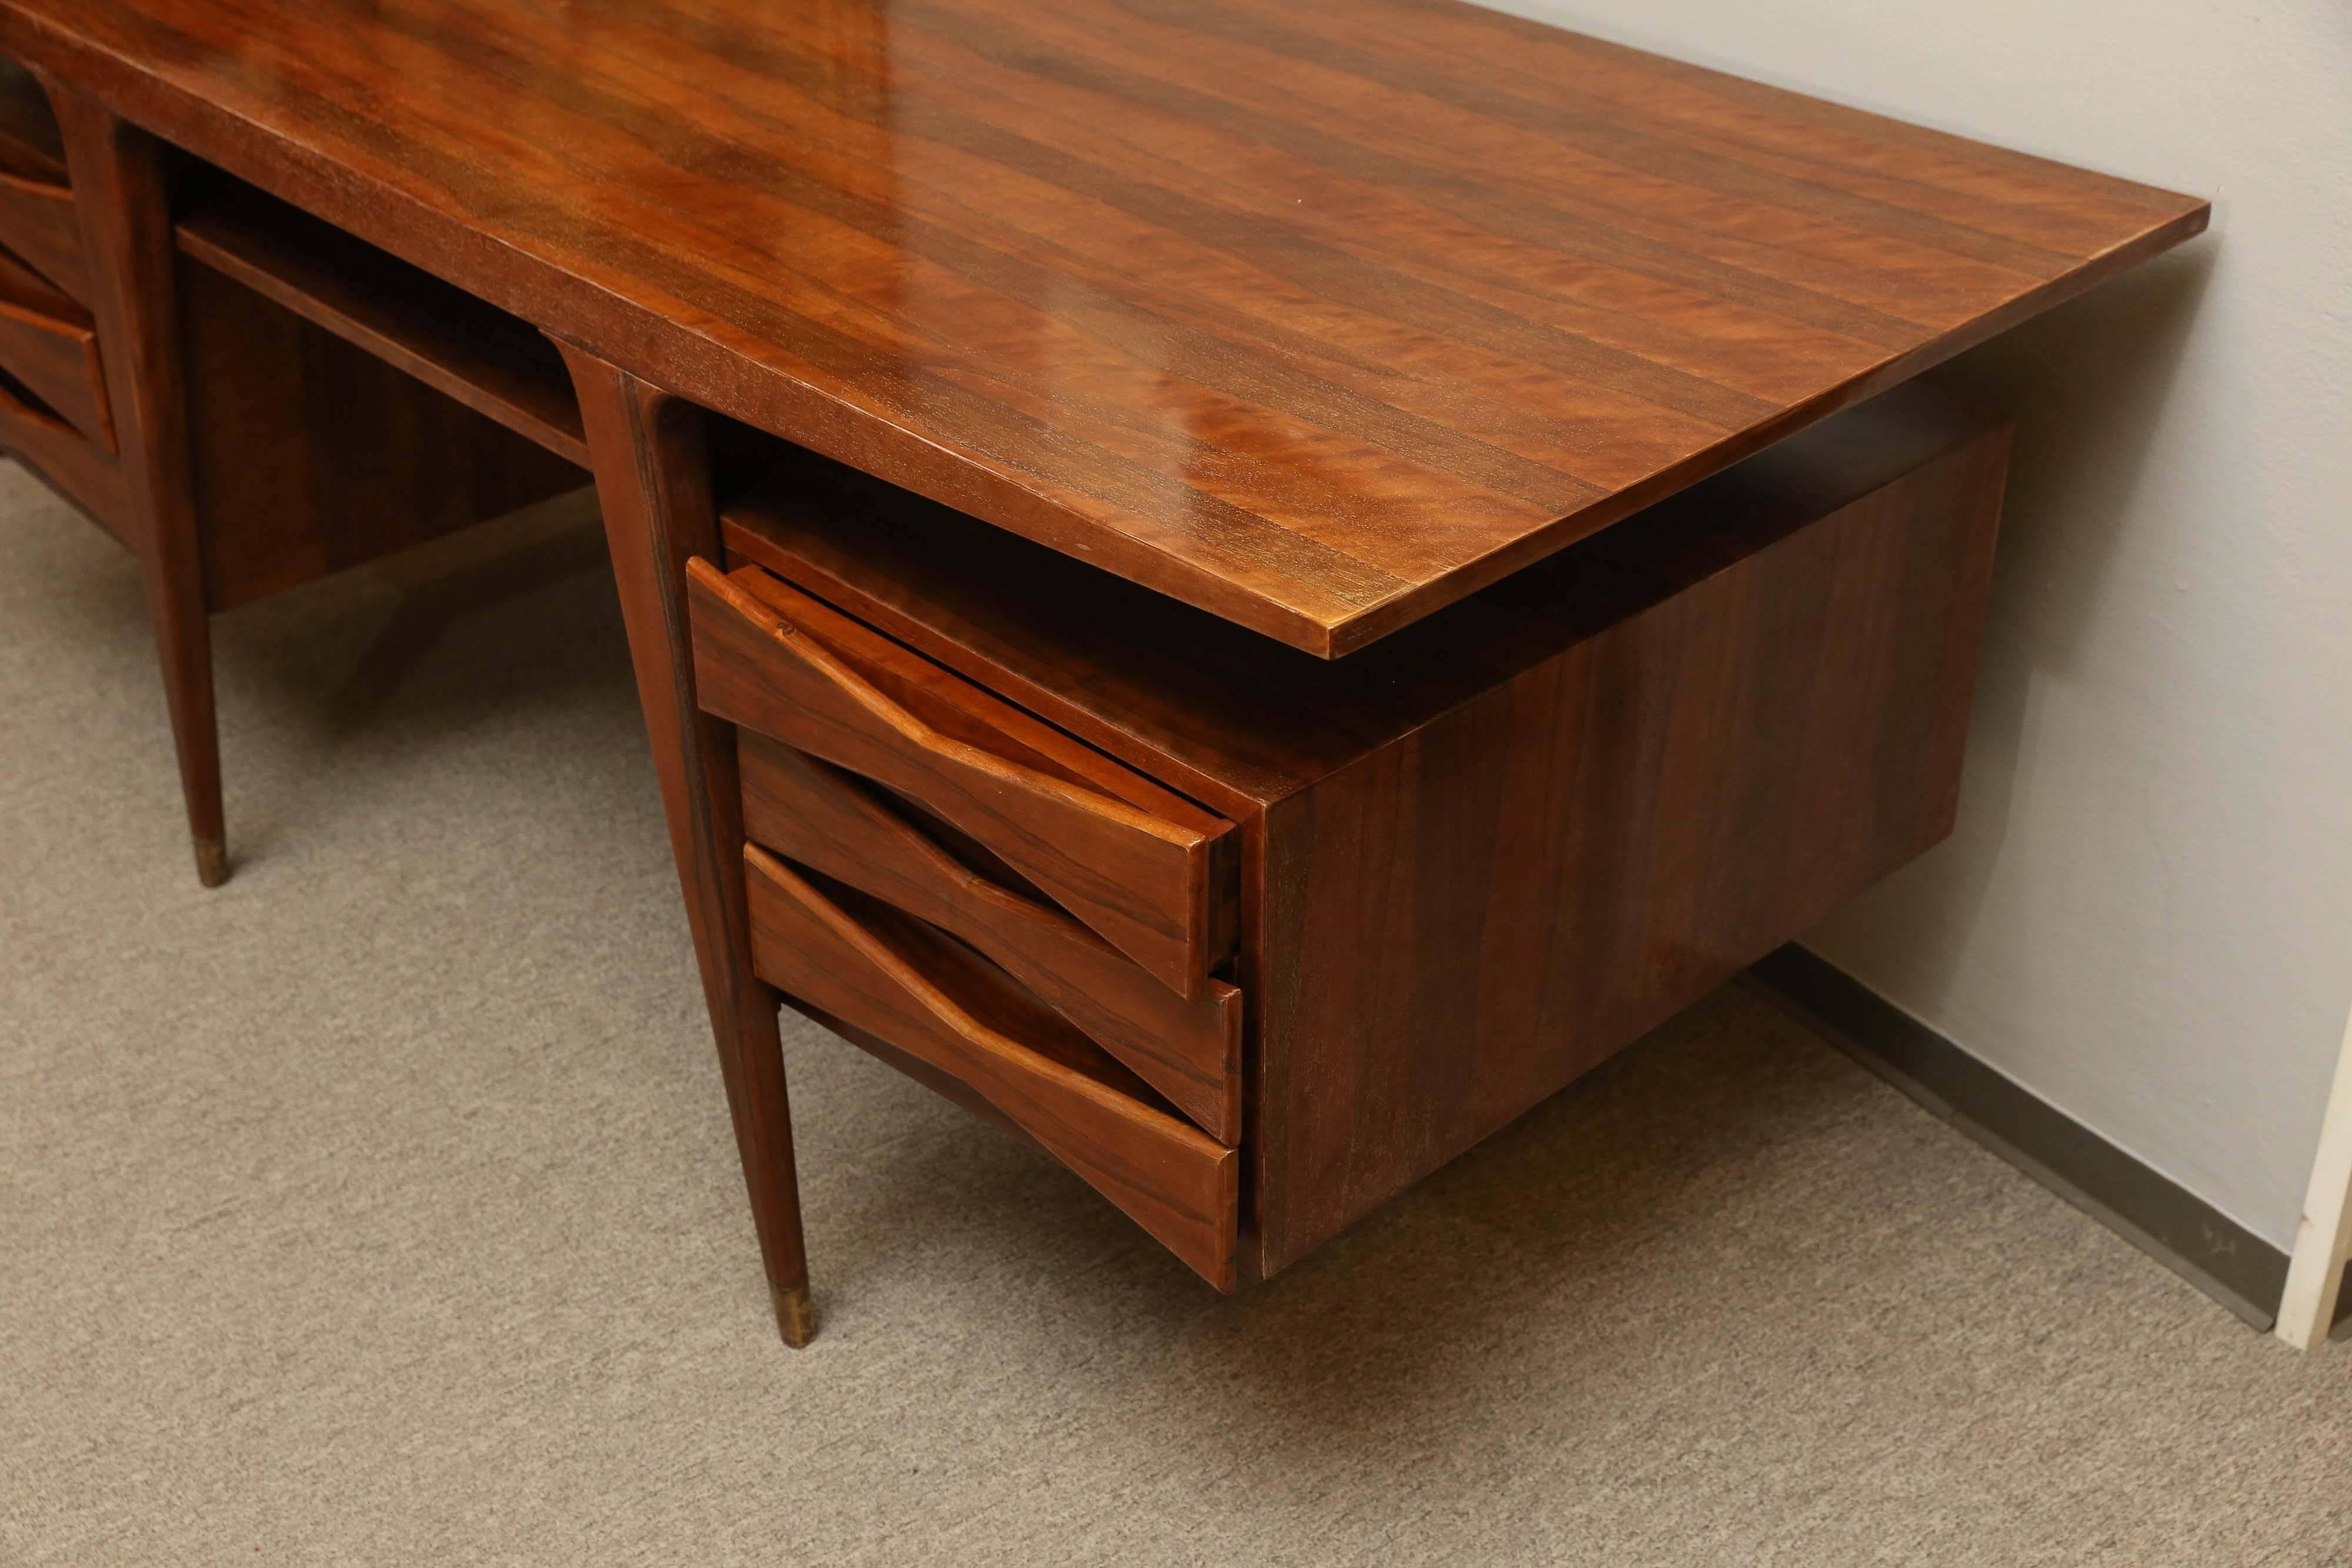 The wide tabletop is presenting a fine walnut wood. Right beneath the top there is wide shelf. Three drawers are attached on either side. Each of the drawers has “bow” shaped handle.
Four slim elongated legs are supporting the desk. On the bottom